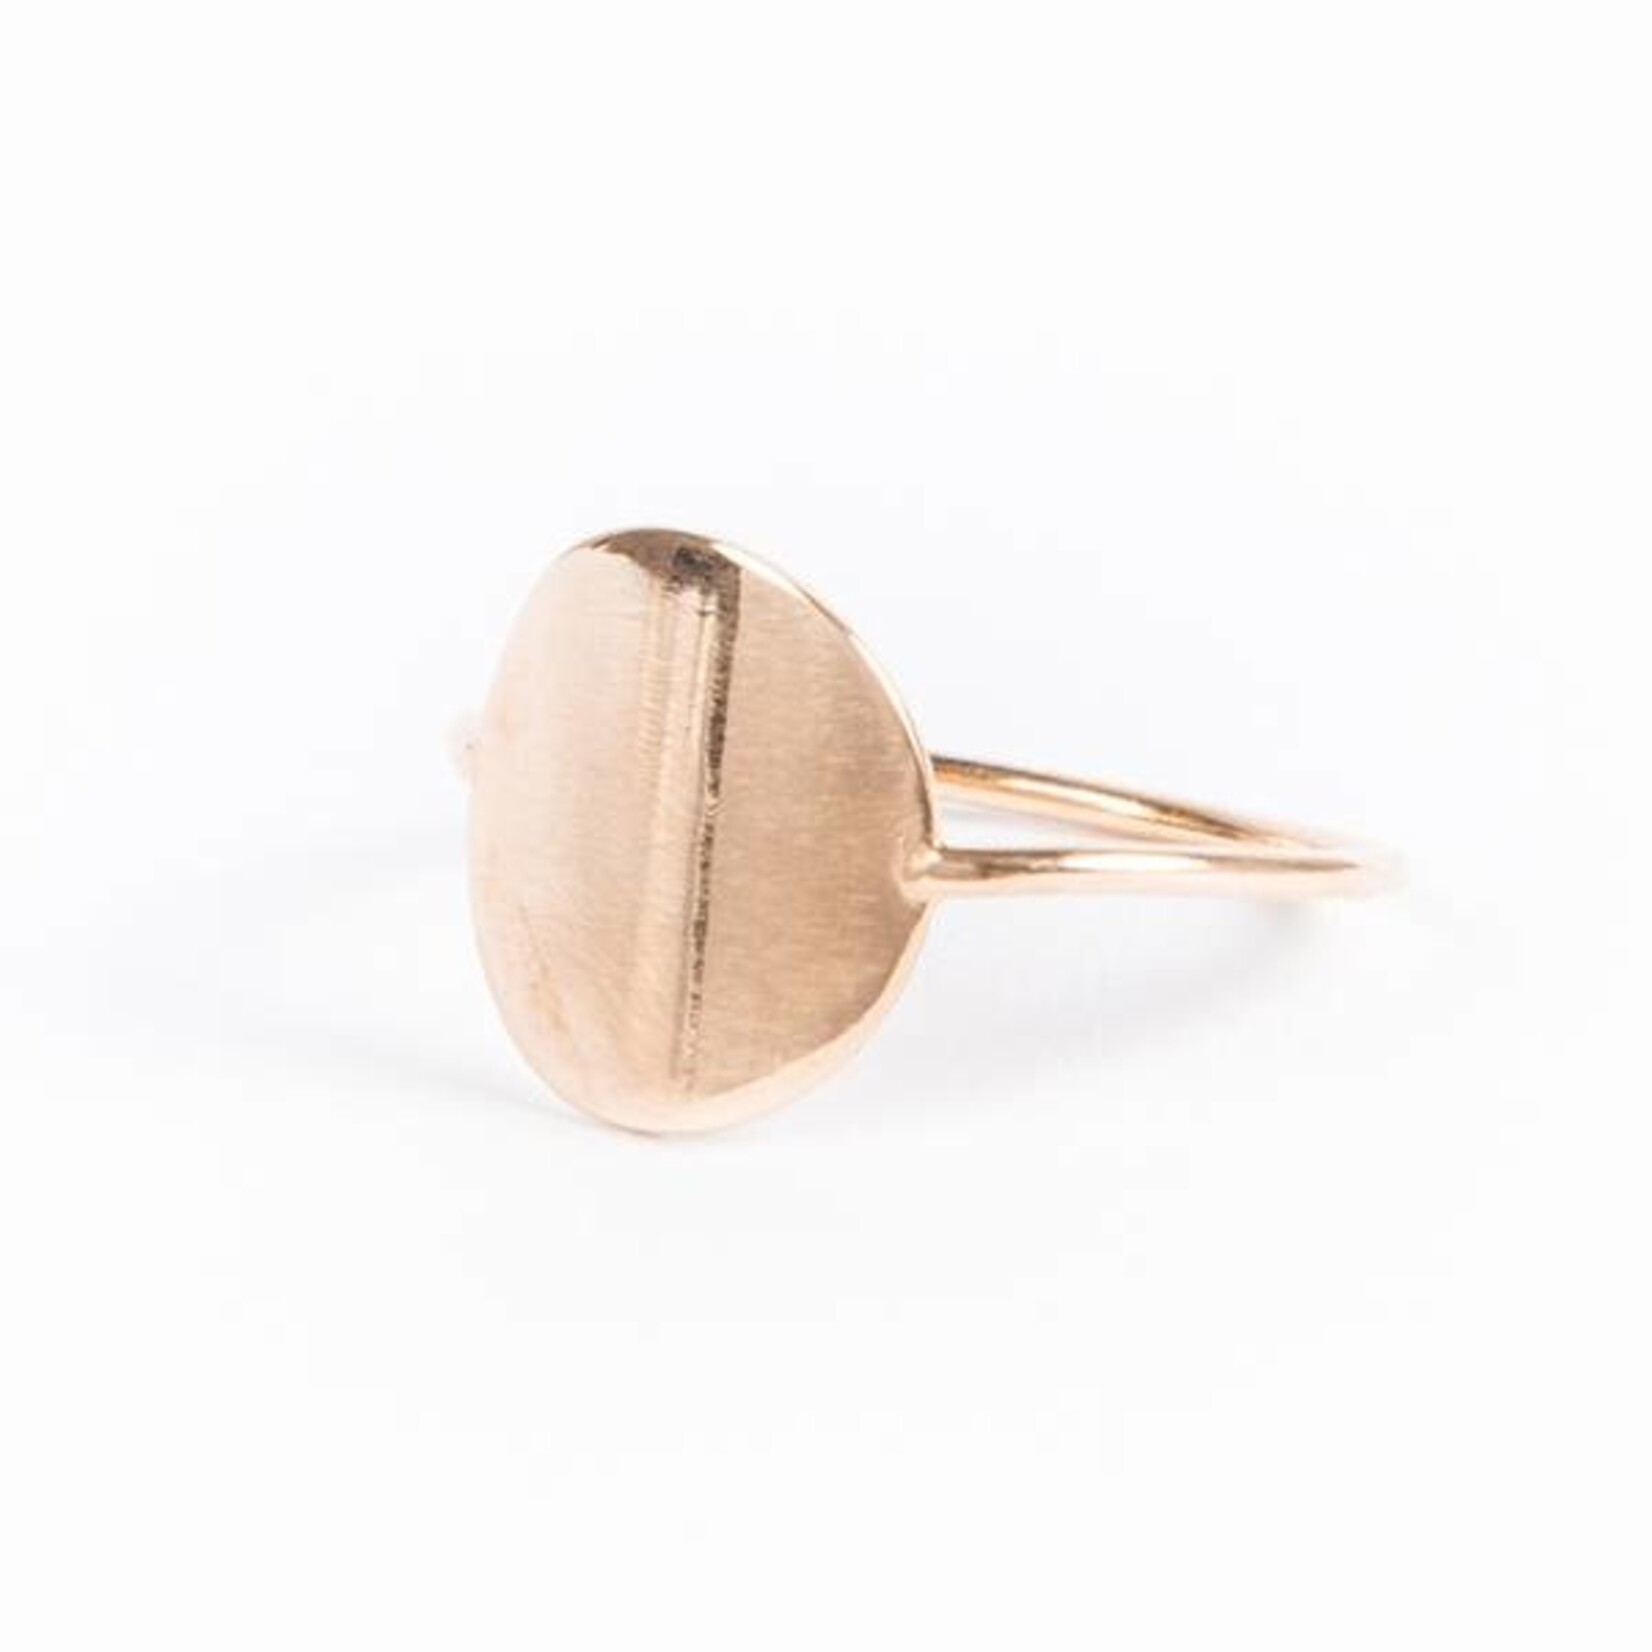 charlotte wooning ring geometry coin goud